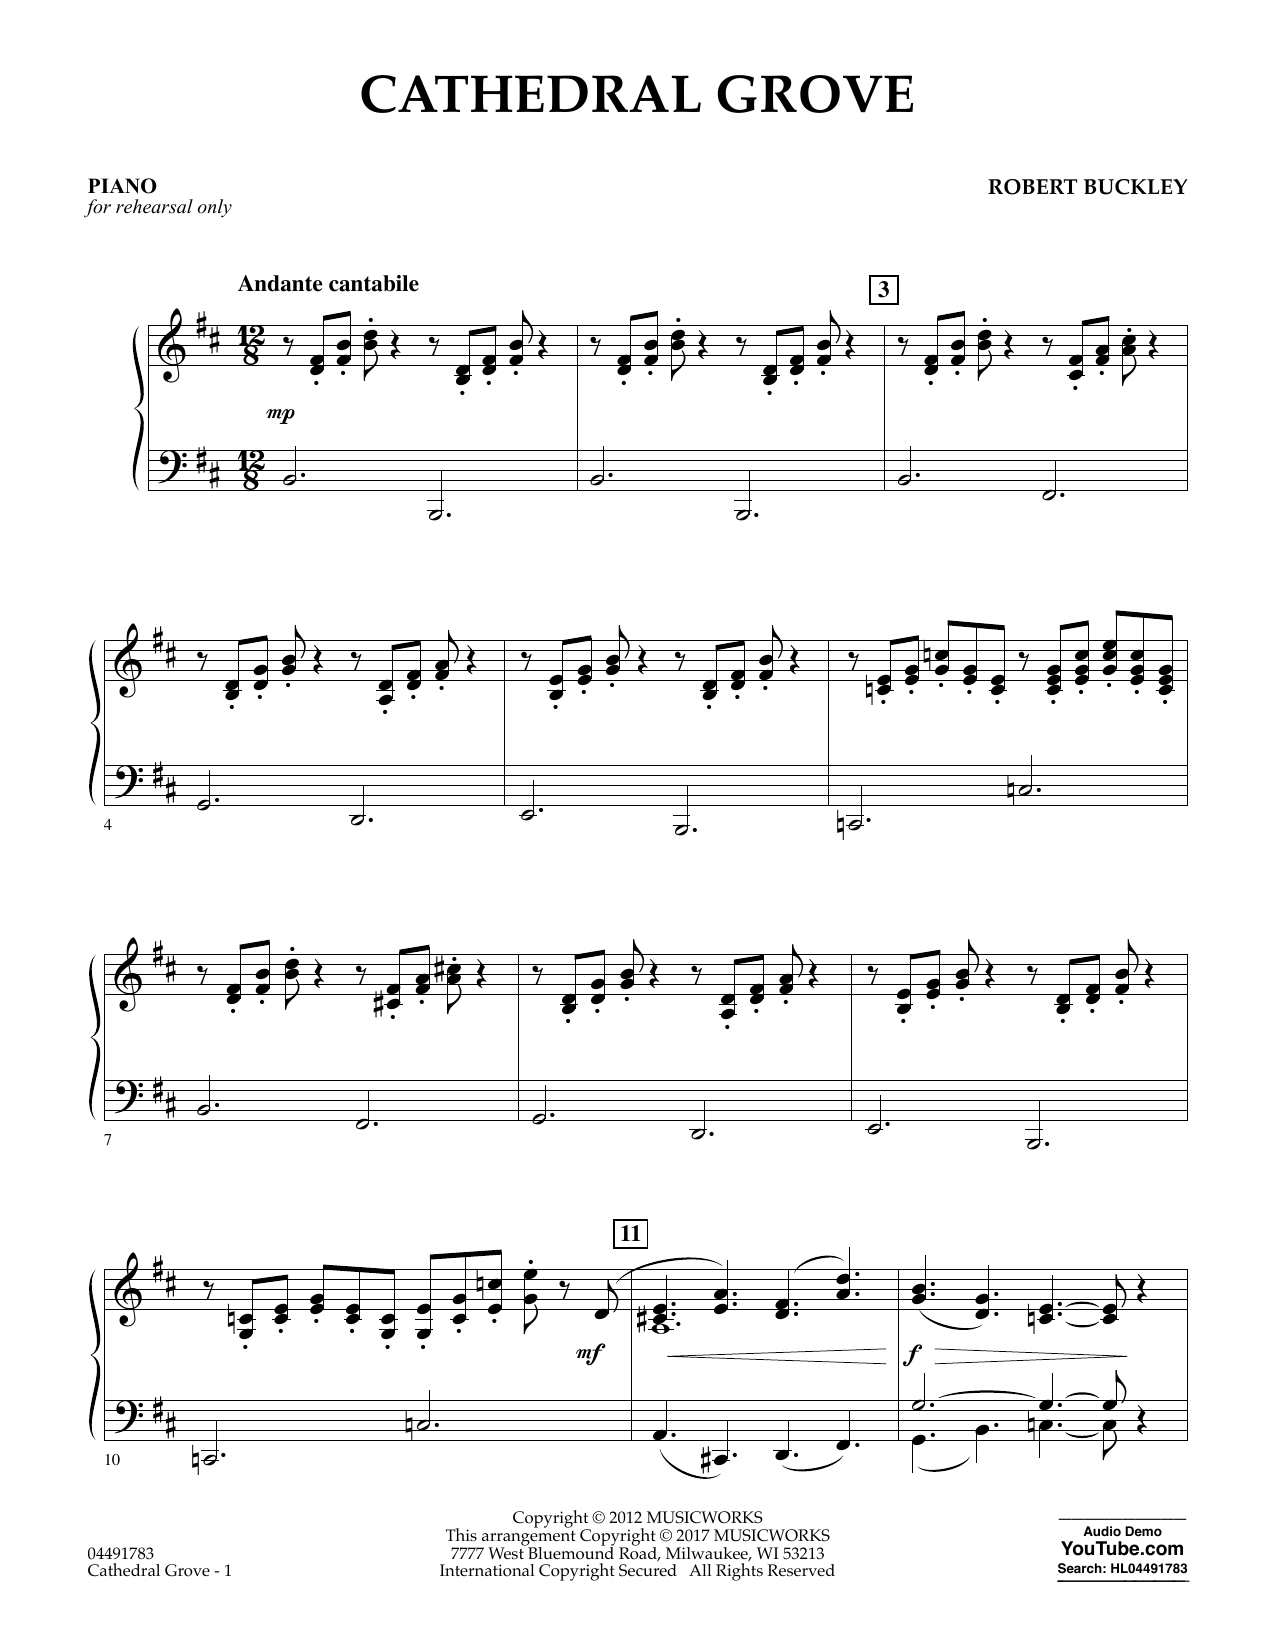 Download Robert Buckley Cathedral Grove - Piano Sheet Music